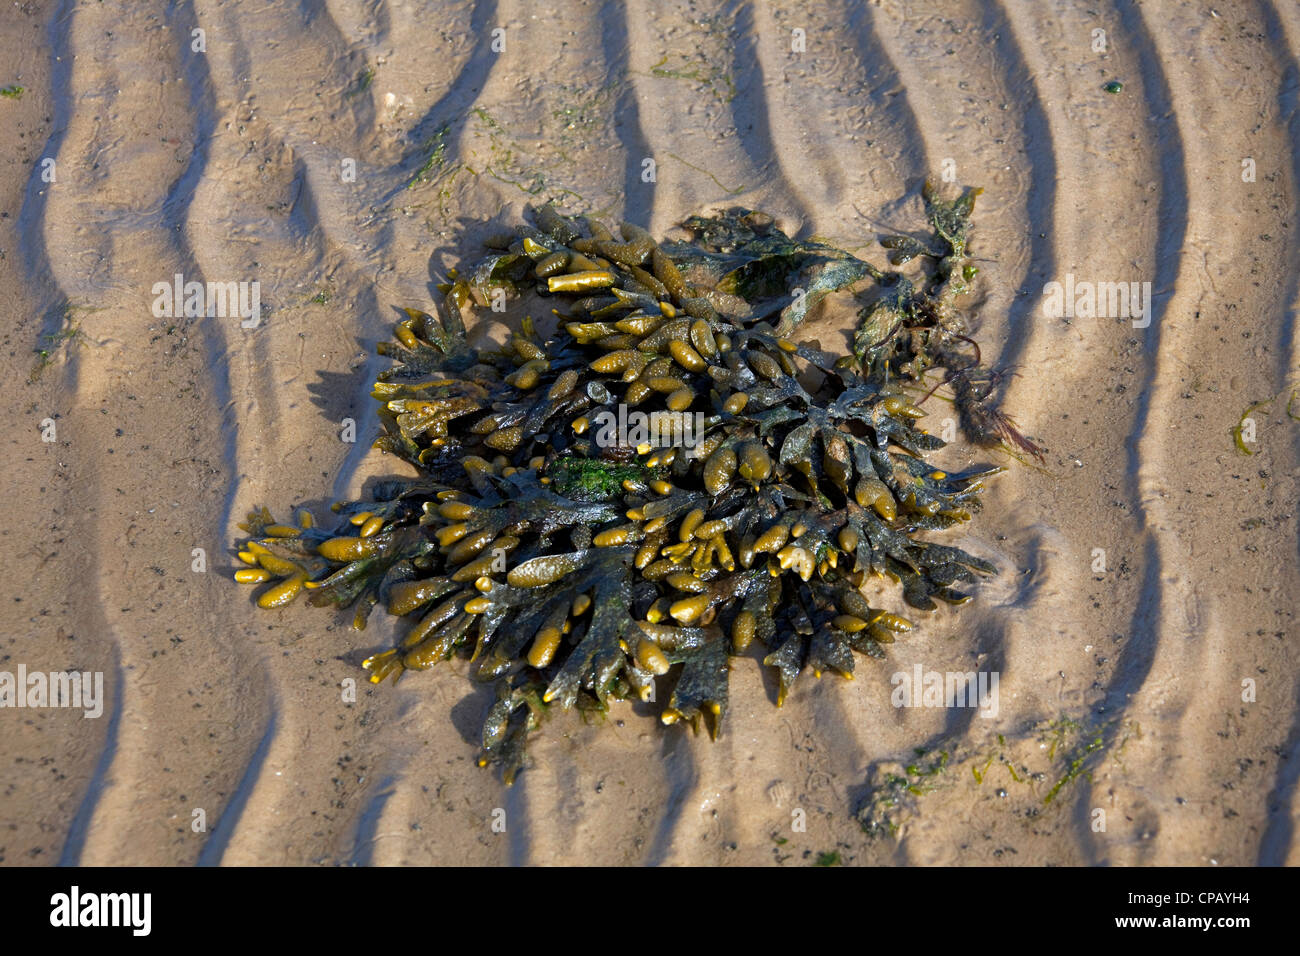 Bladder wrack / bladderwrack (Fucus vesiculosus) washed on beach at low tide, Wadden Sea National Park, Germany Stock Photo